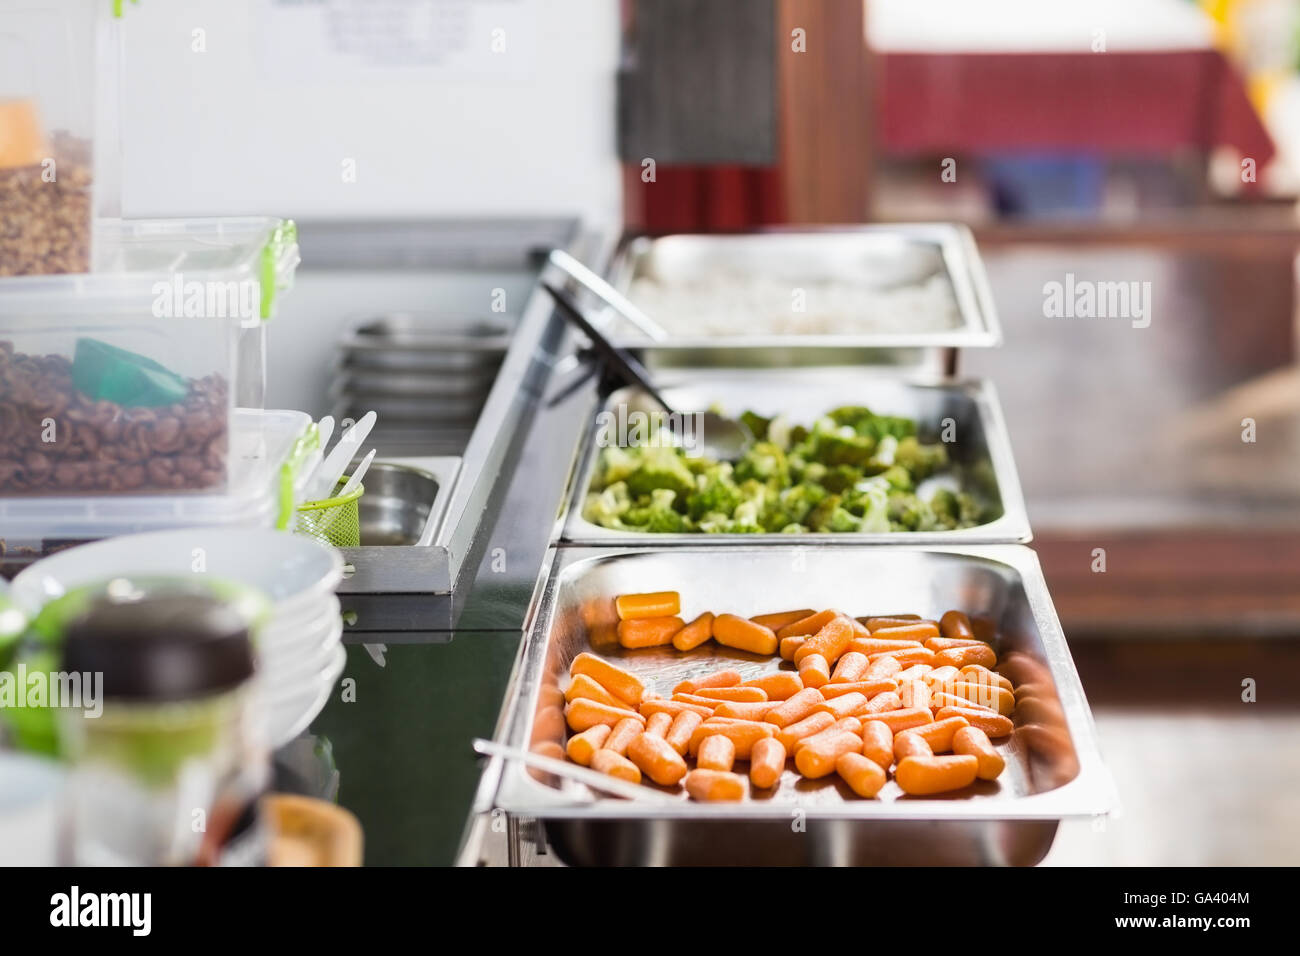 Lunch service station in school cafeteria Stock Photo